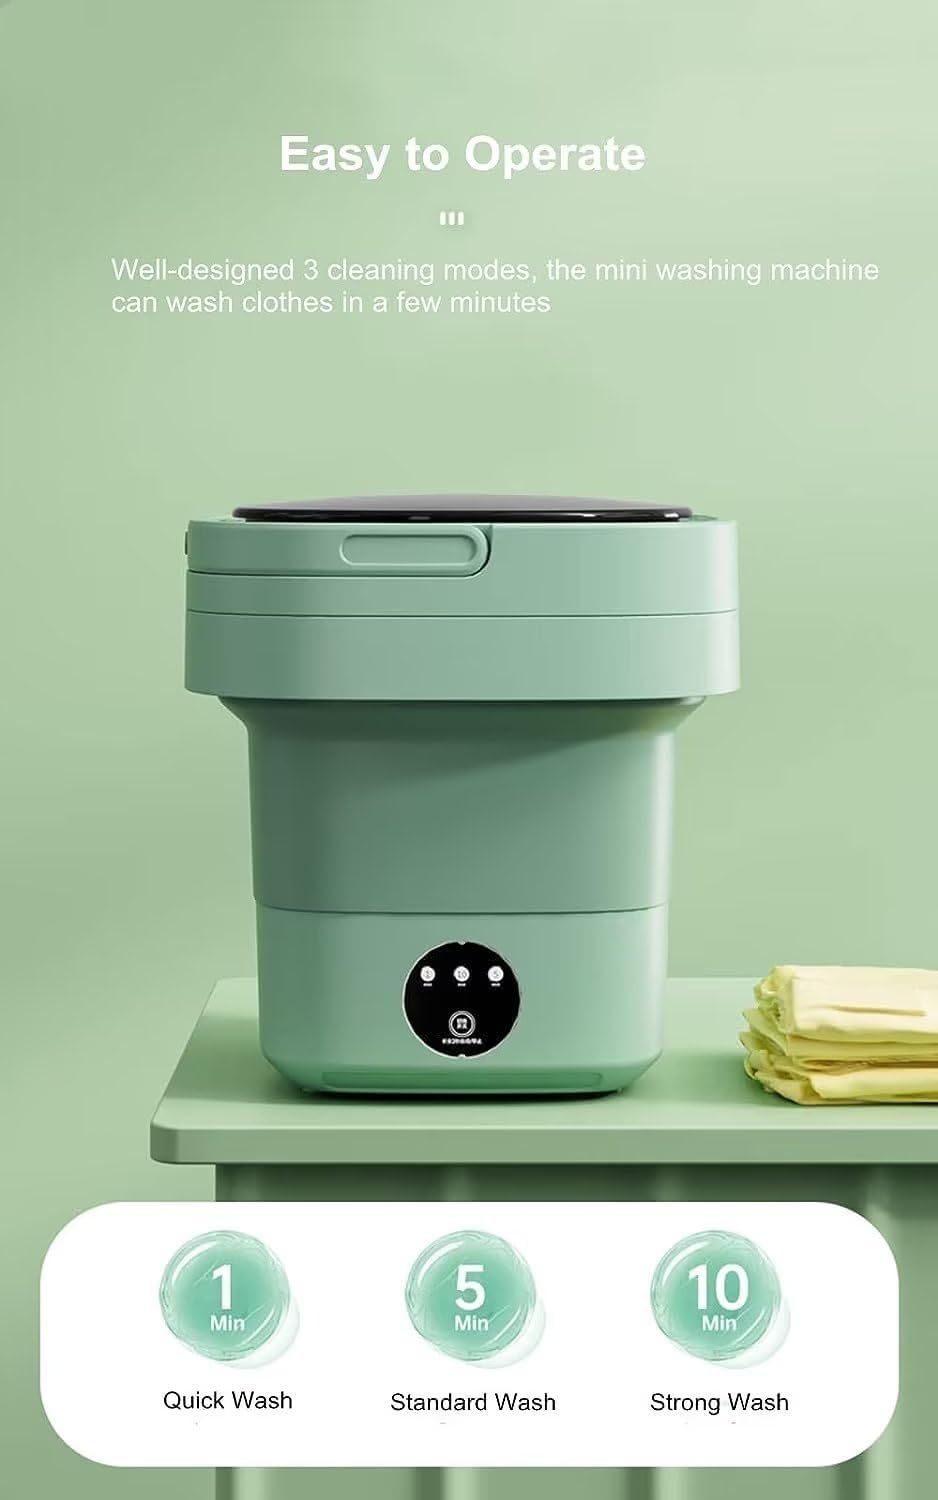 Small Portable Washing Machine, Mini Washer 9L High Capacity with 3 Modes Deep Cleaning for Underwear, Baby Clothes, or Small Items, Foldable Washing Machine for Apartments, Camping, Travel (Green)